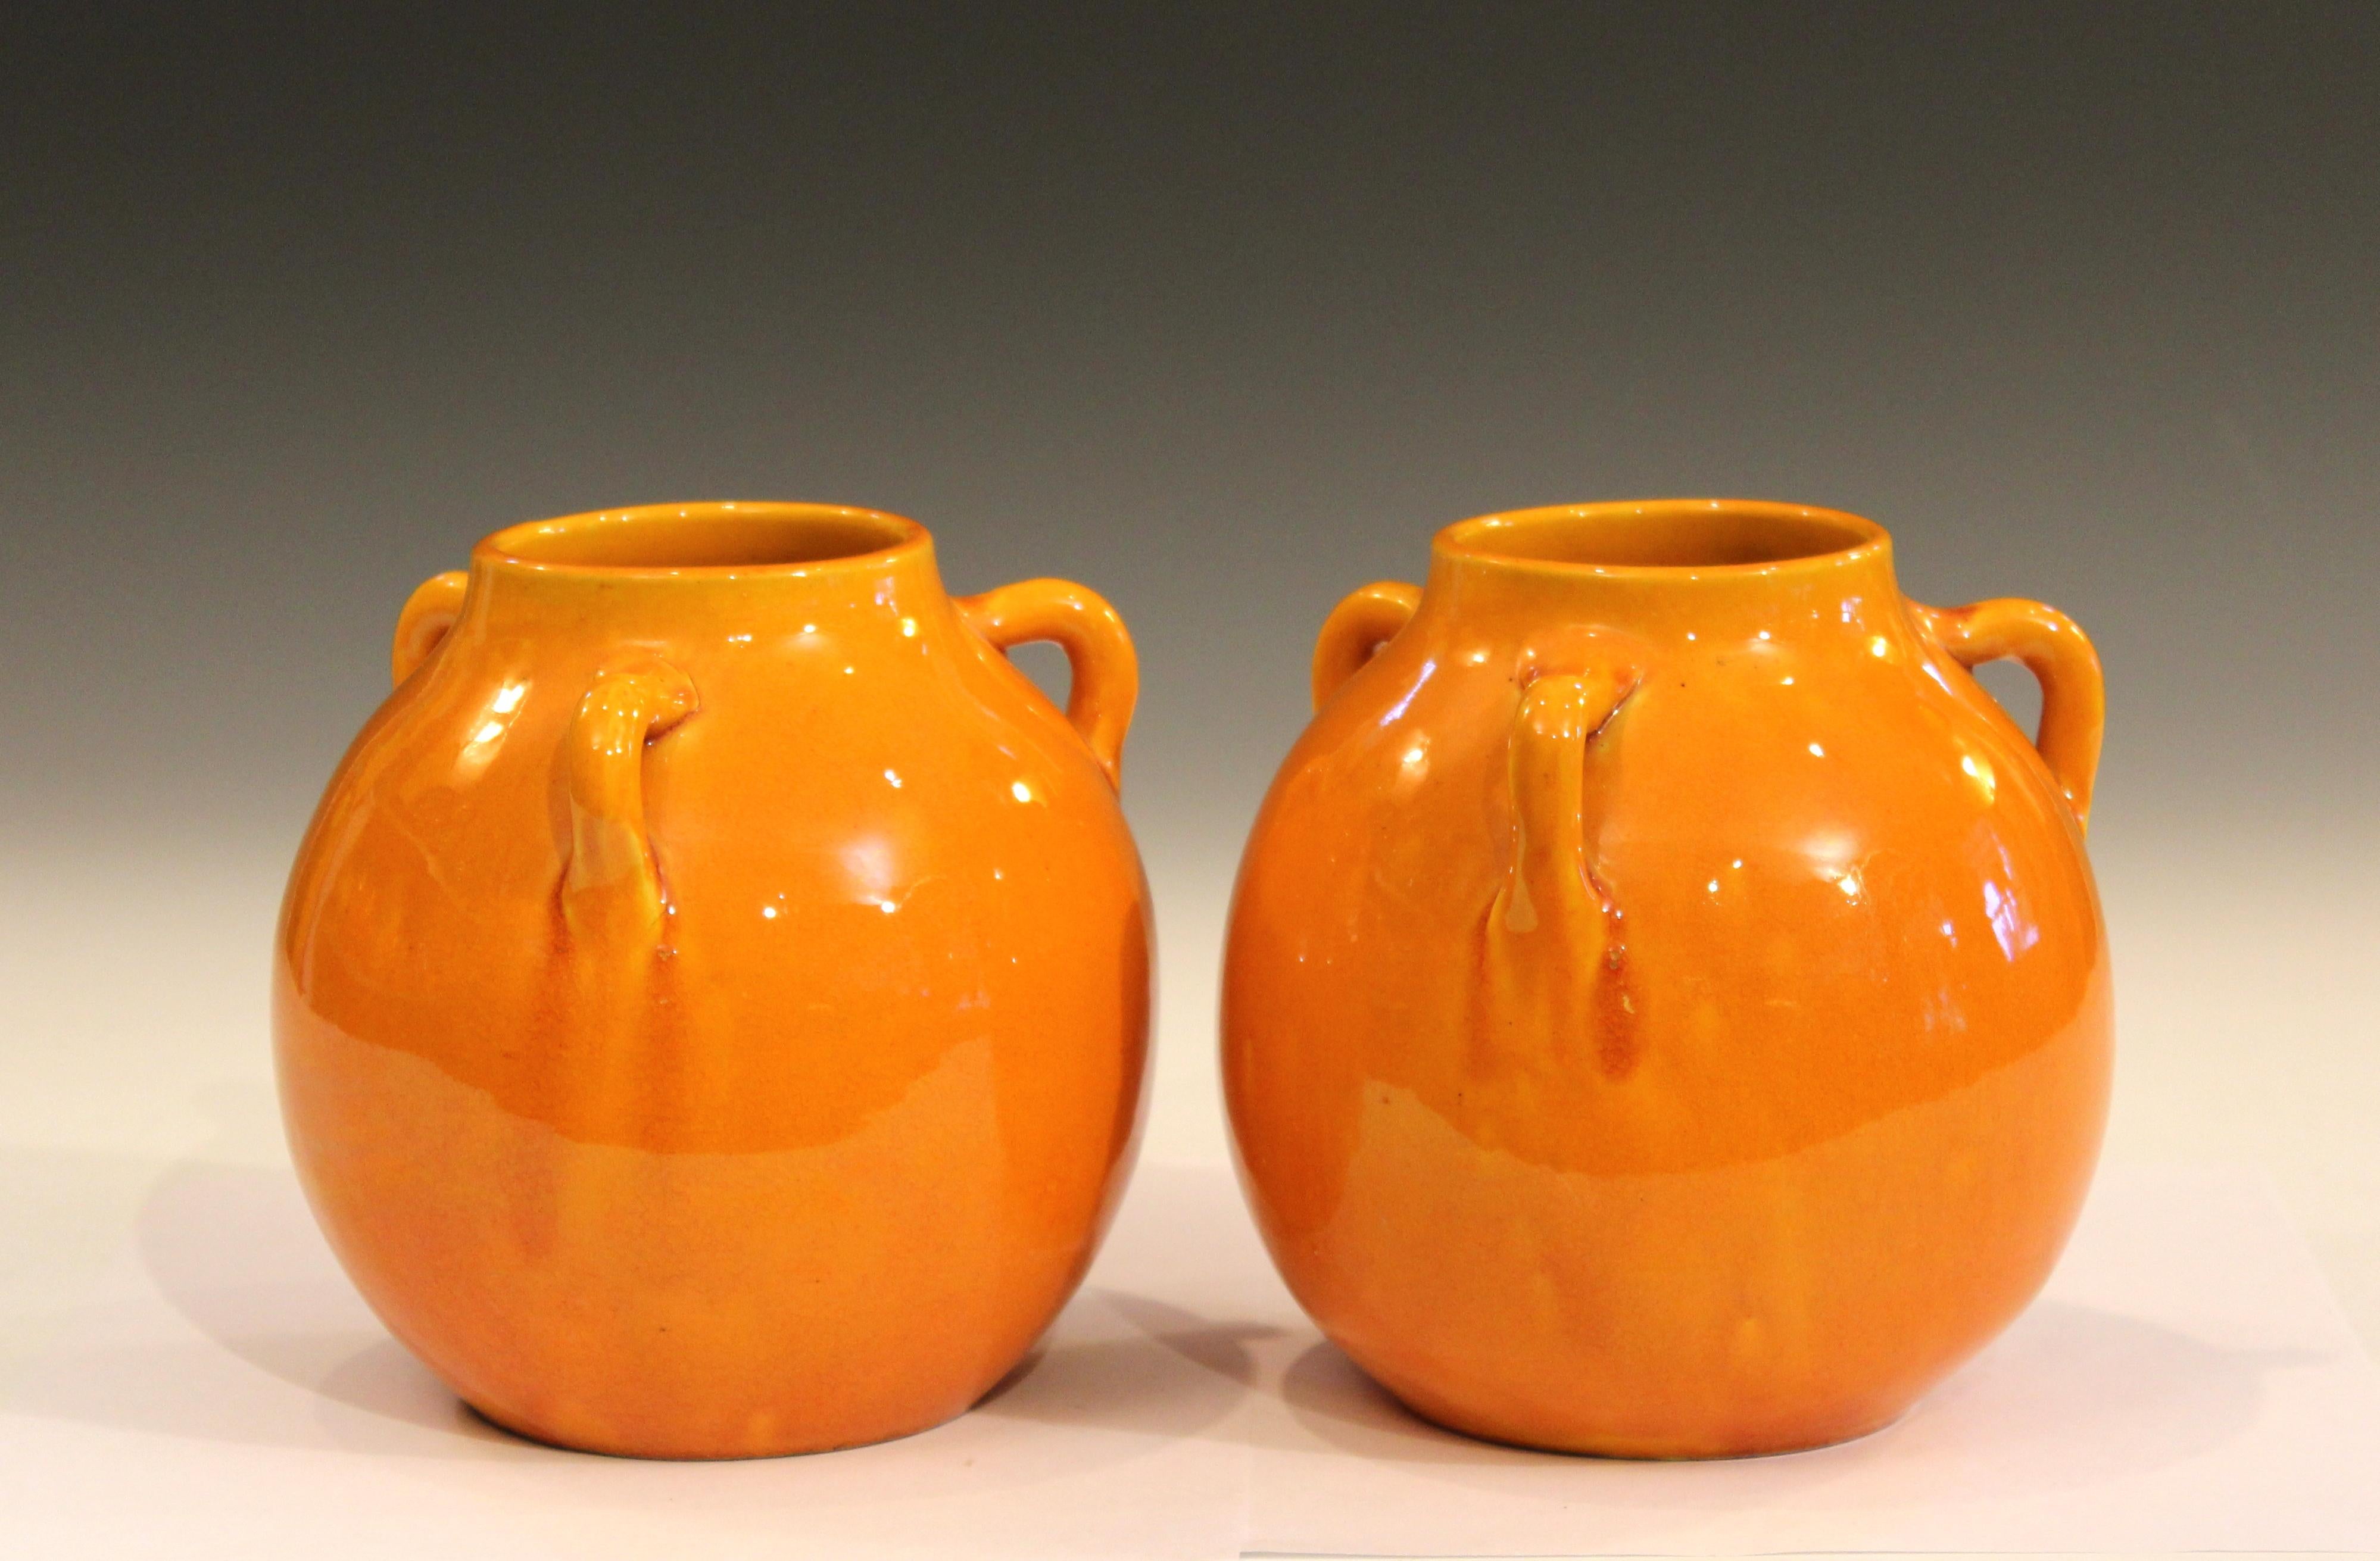 Pair of Awaji pottery vases in globular form with three handles and golden yellow crackle glaze, circa 1930s. Measures: 6